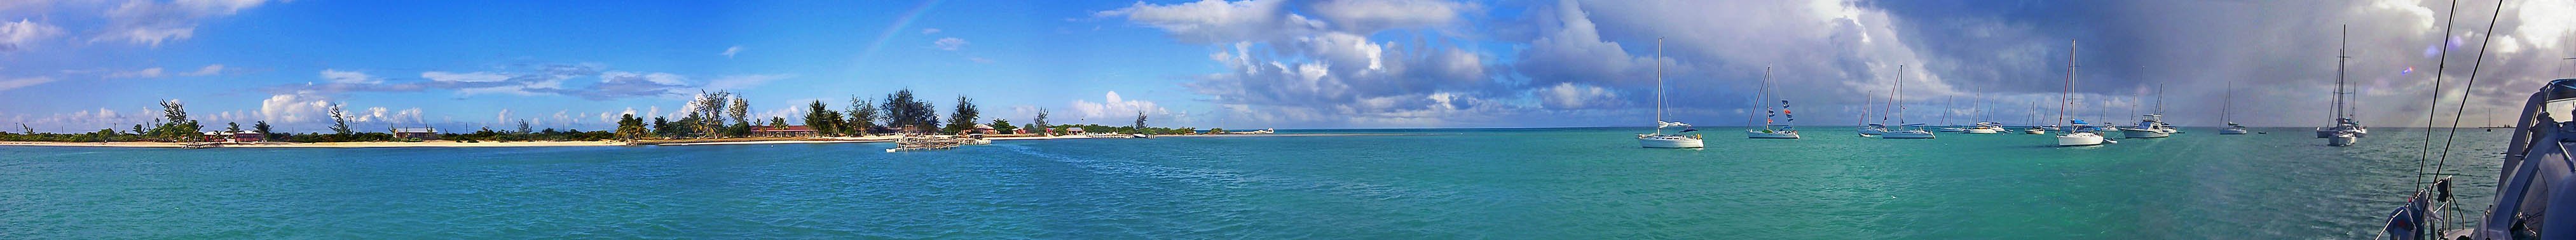 Panorama of Anegada Reef Hotel anchorage